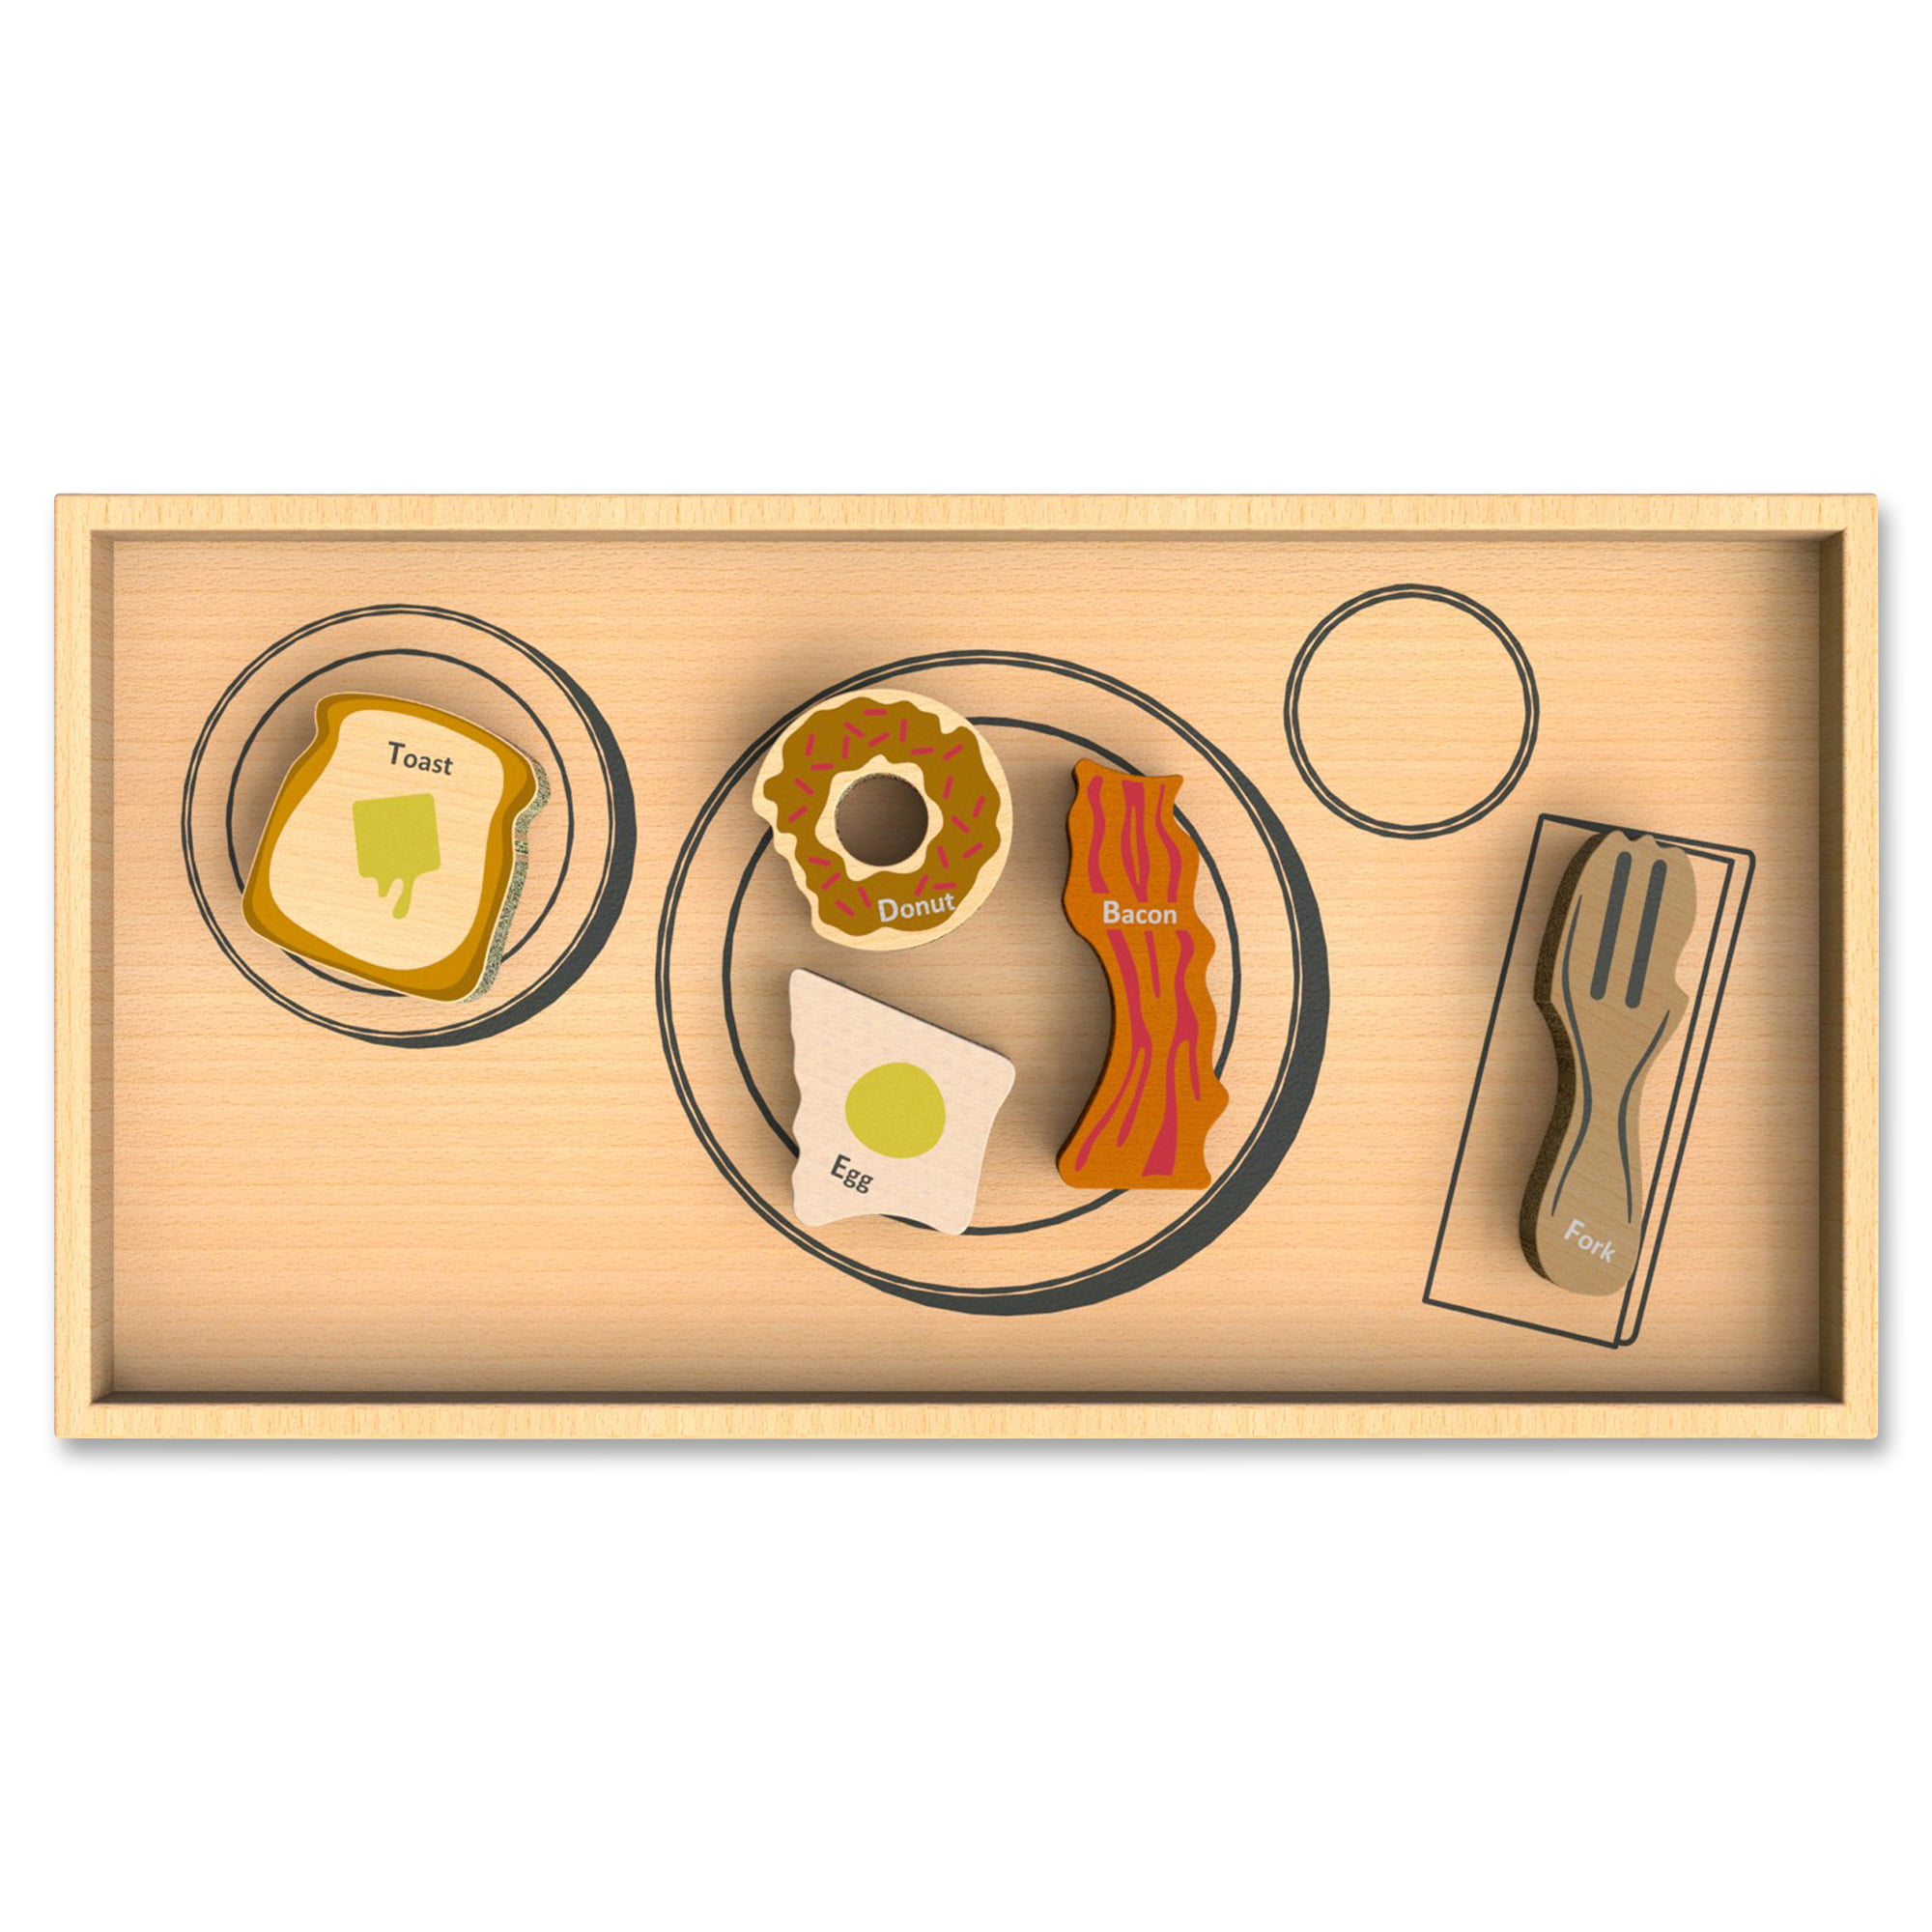 Beginagain Wooden Alphabites Food Puzzle and Playset